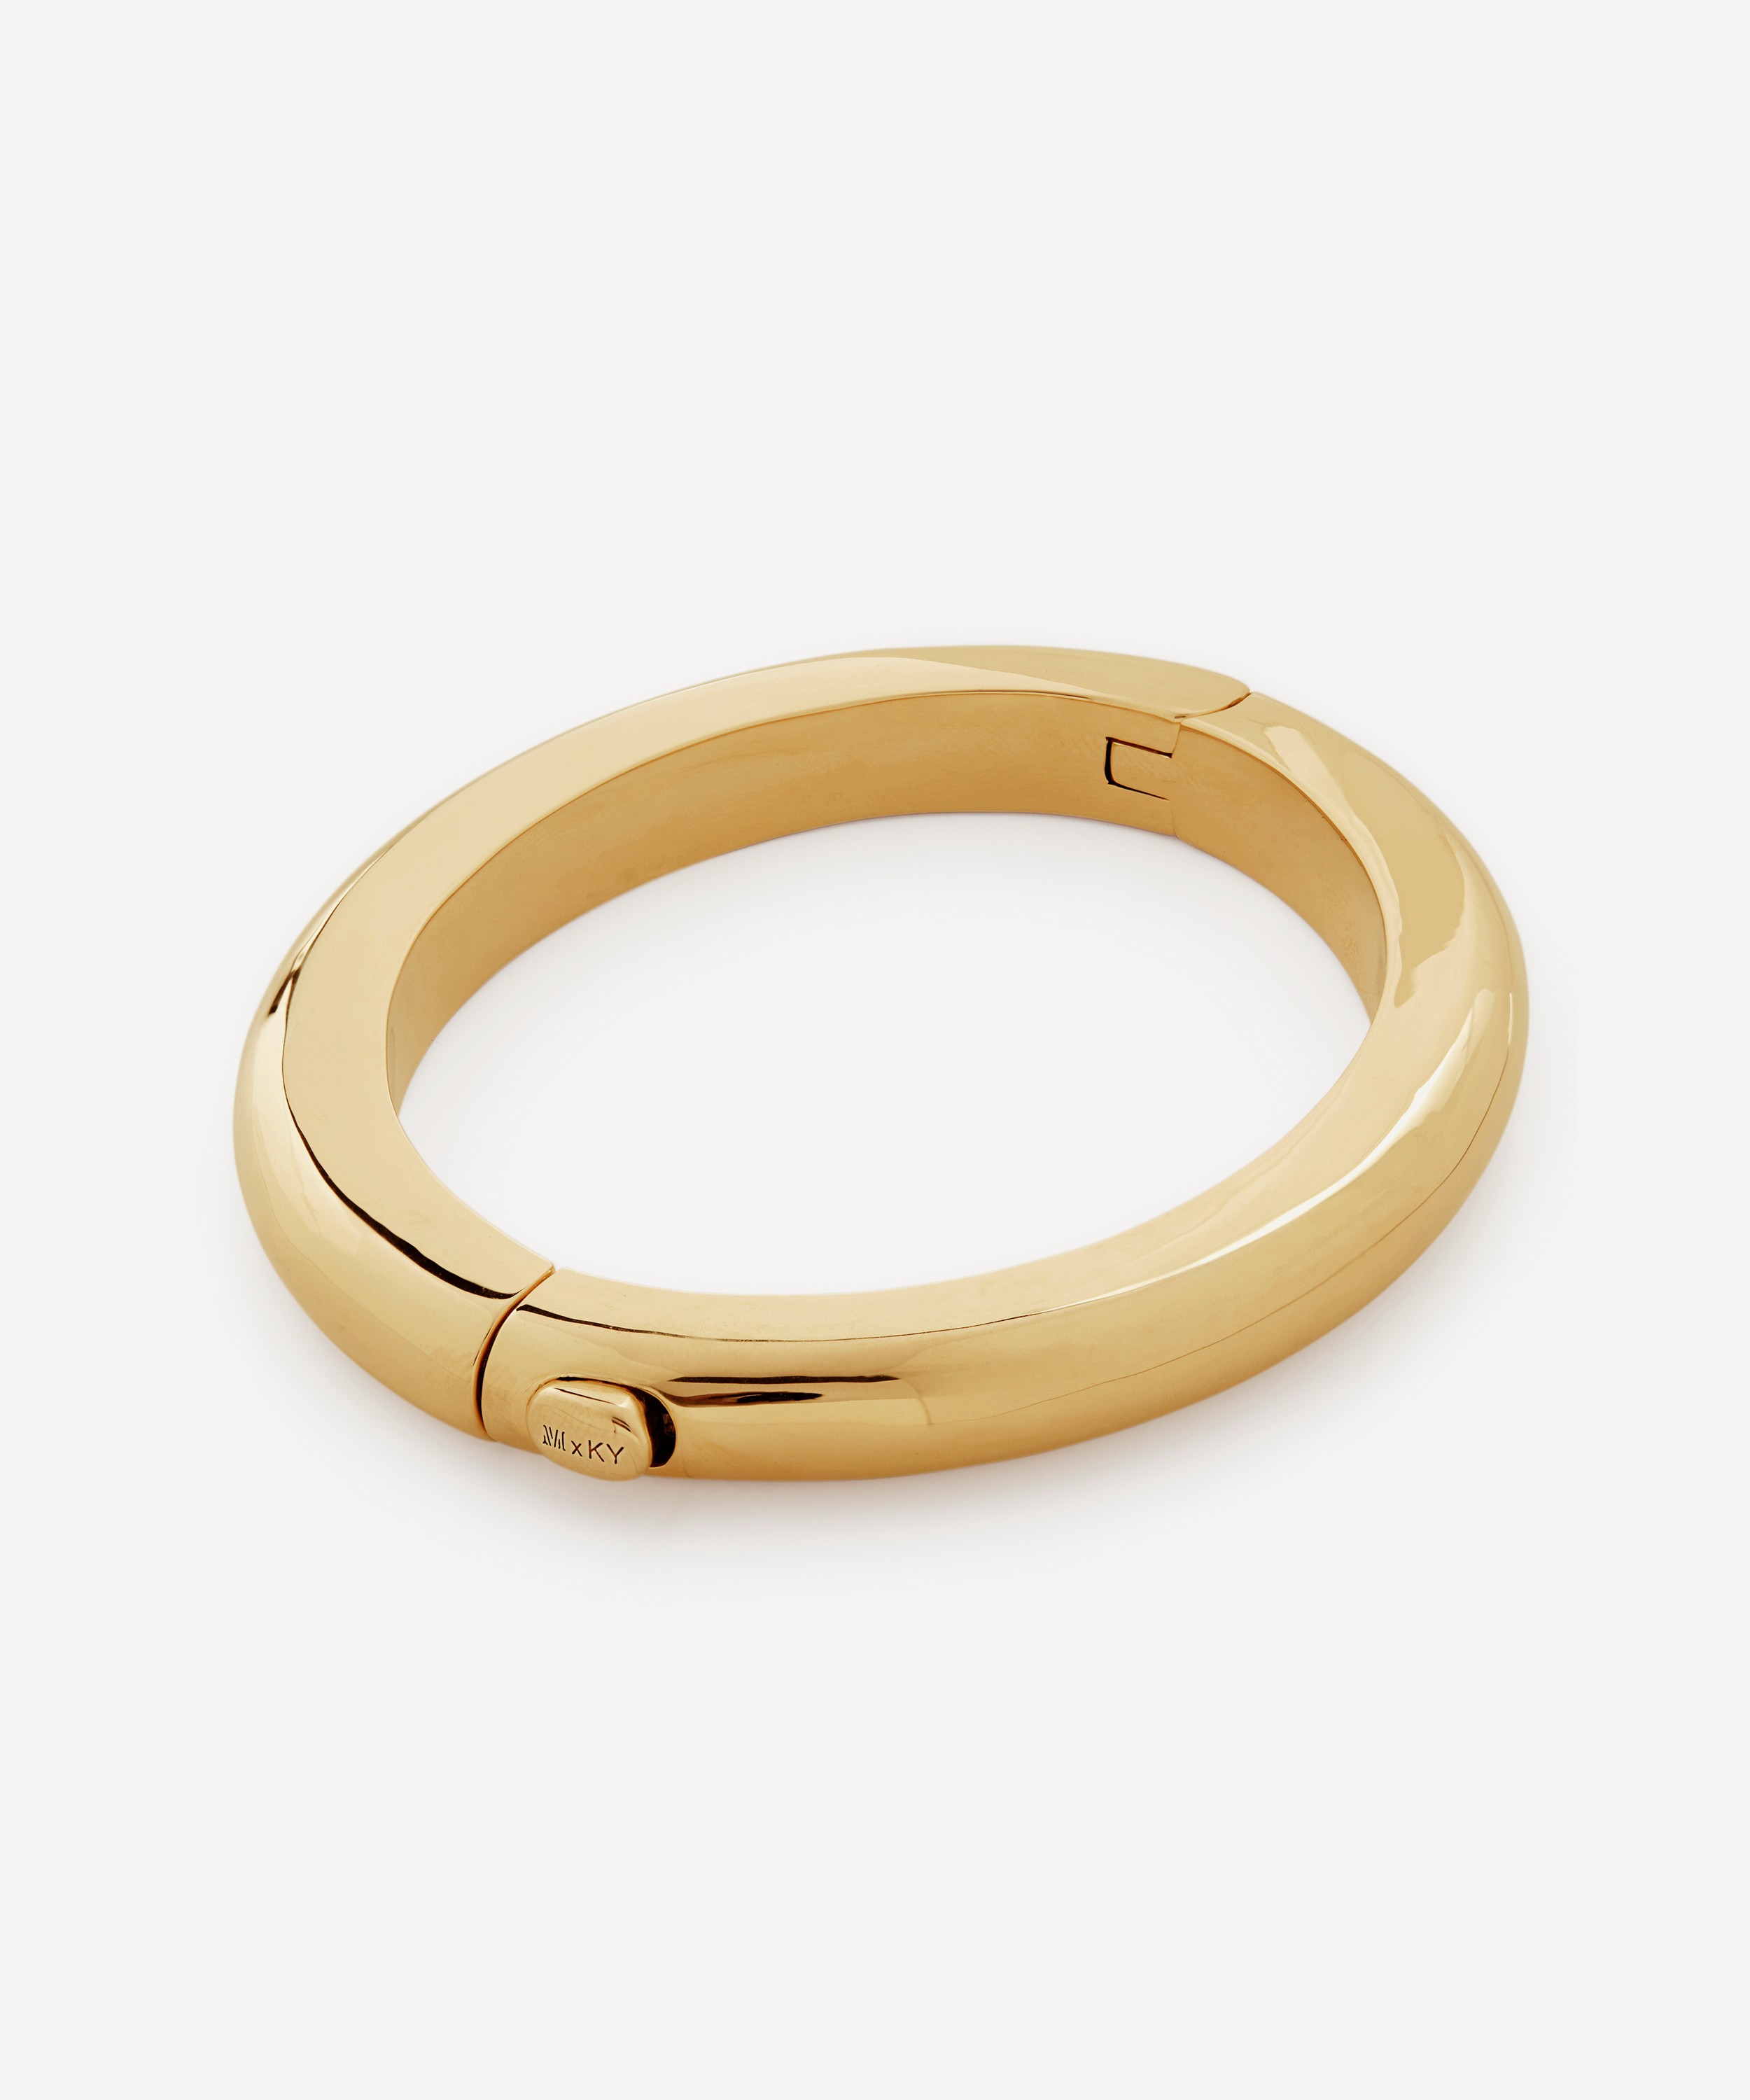 Monica Vinader - X Kate Young 18ct Gold-Plated Vermeil Silver Bangle Bracelet